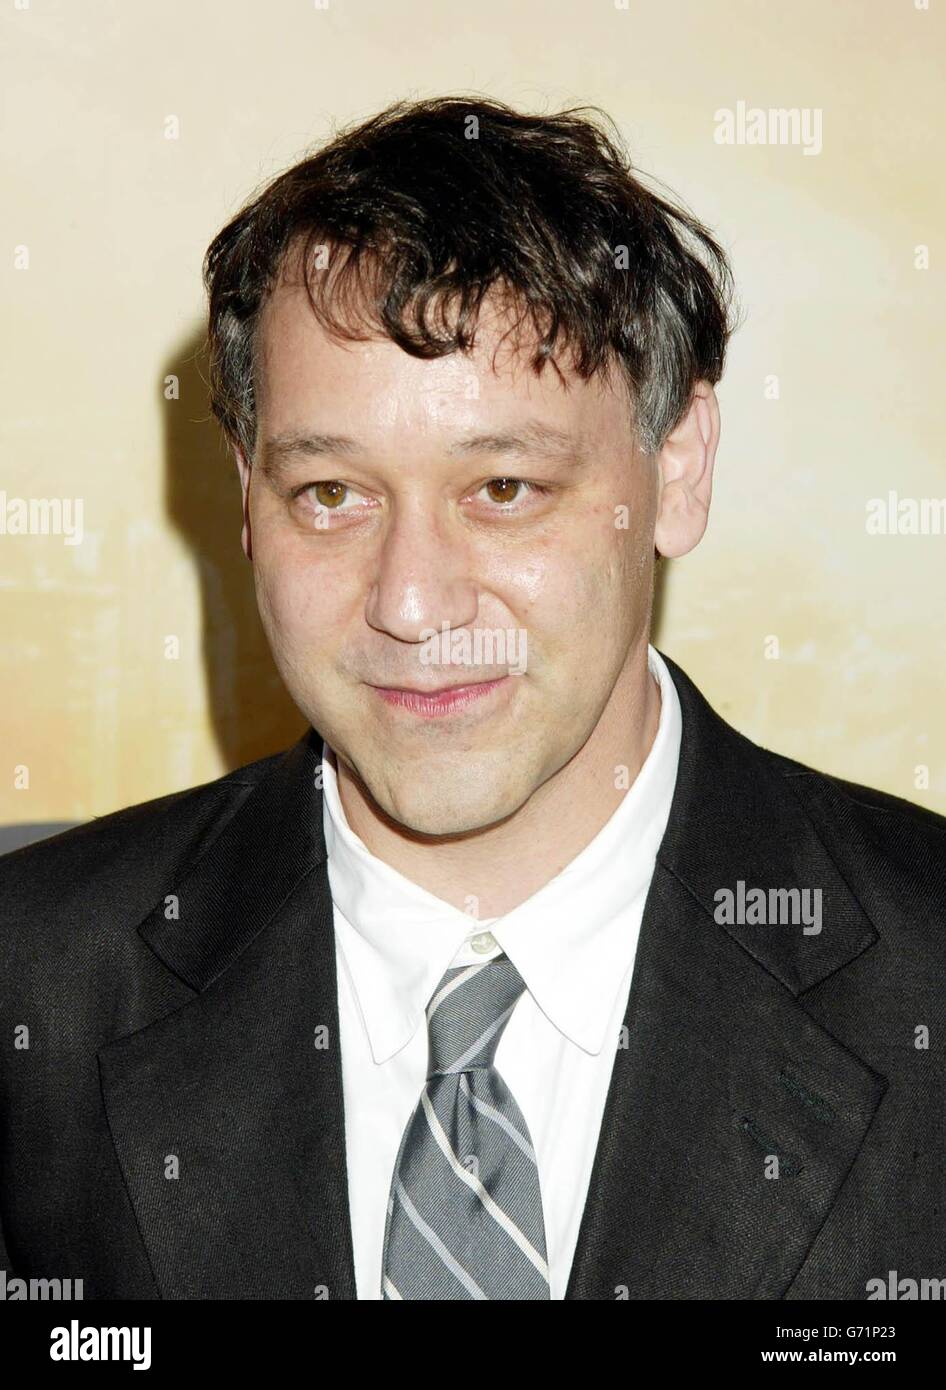 Director Sam Raimi arrives for the premiere of his latest film Spider-man 2, held at the Mann Village theatre, Los Angeles. Stock Photo